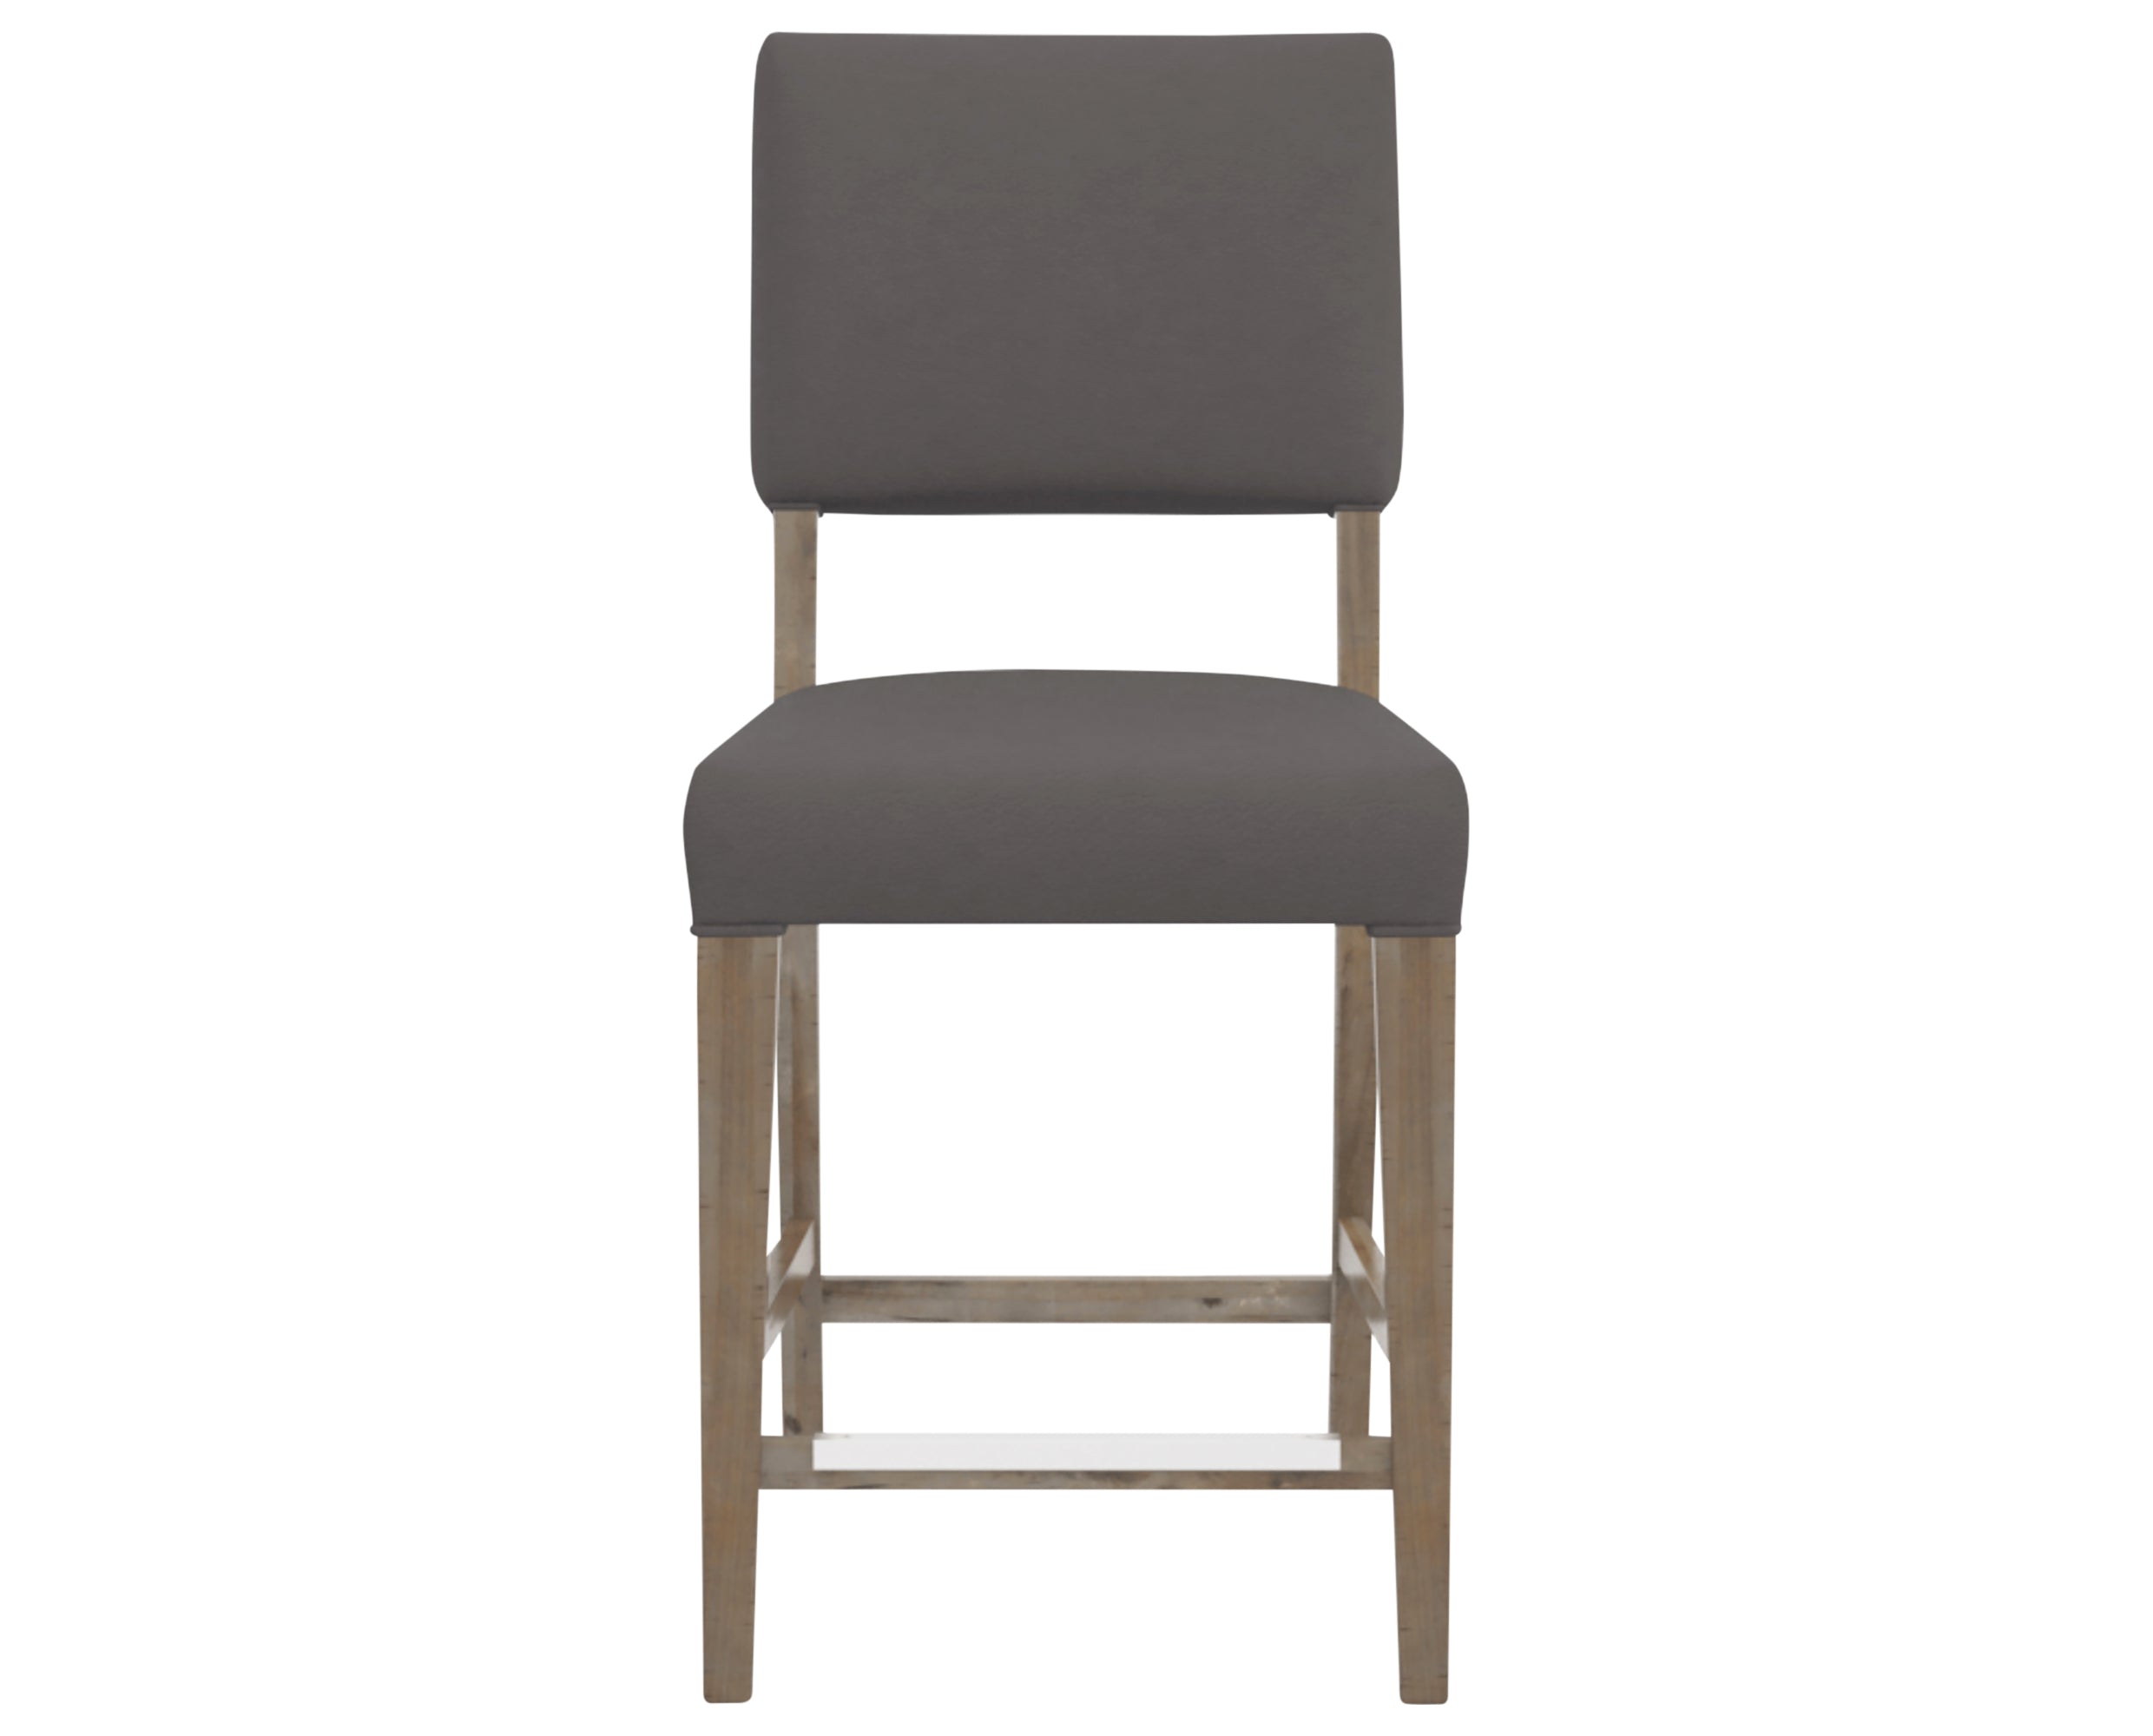 Shadow &amp; Faux Leather XU | Canadel Loft Counter Stool 8051 | Valley Ridge Furniture